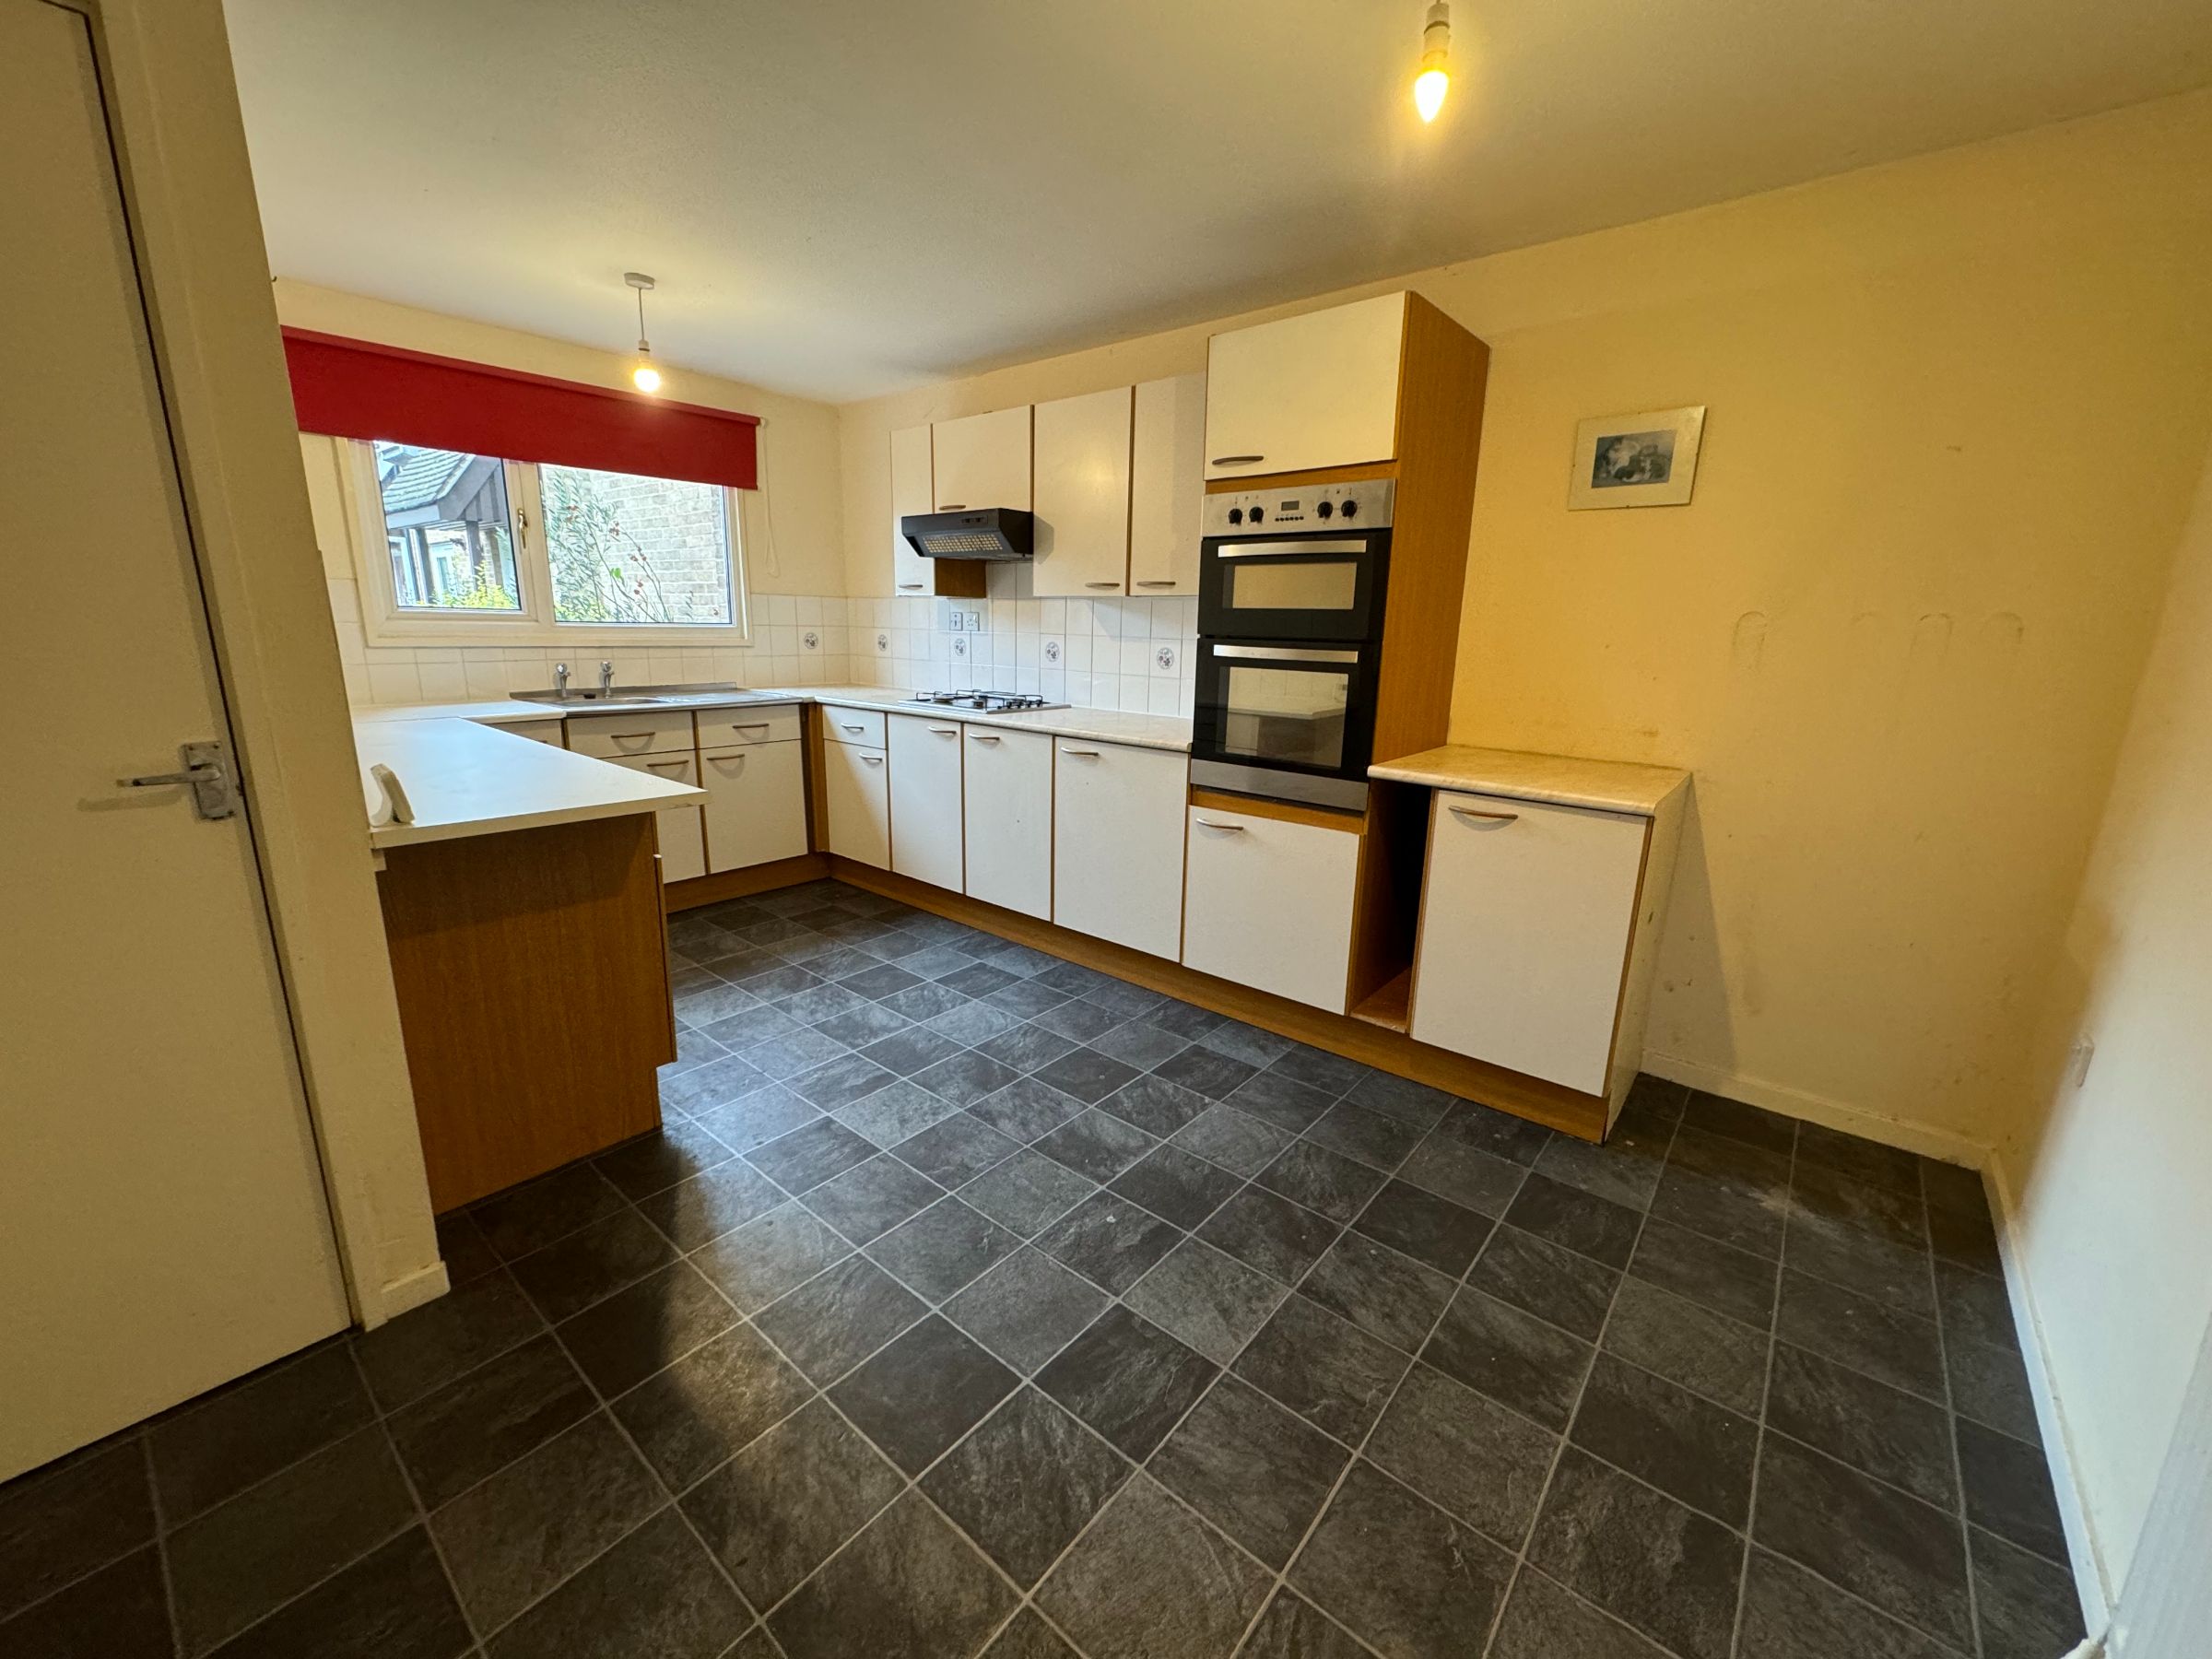 3 bed terraced house for sale in Manton, Peterborough  - Property Image 2